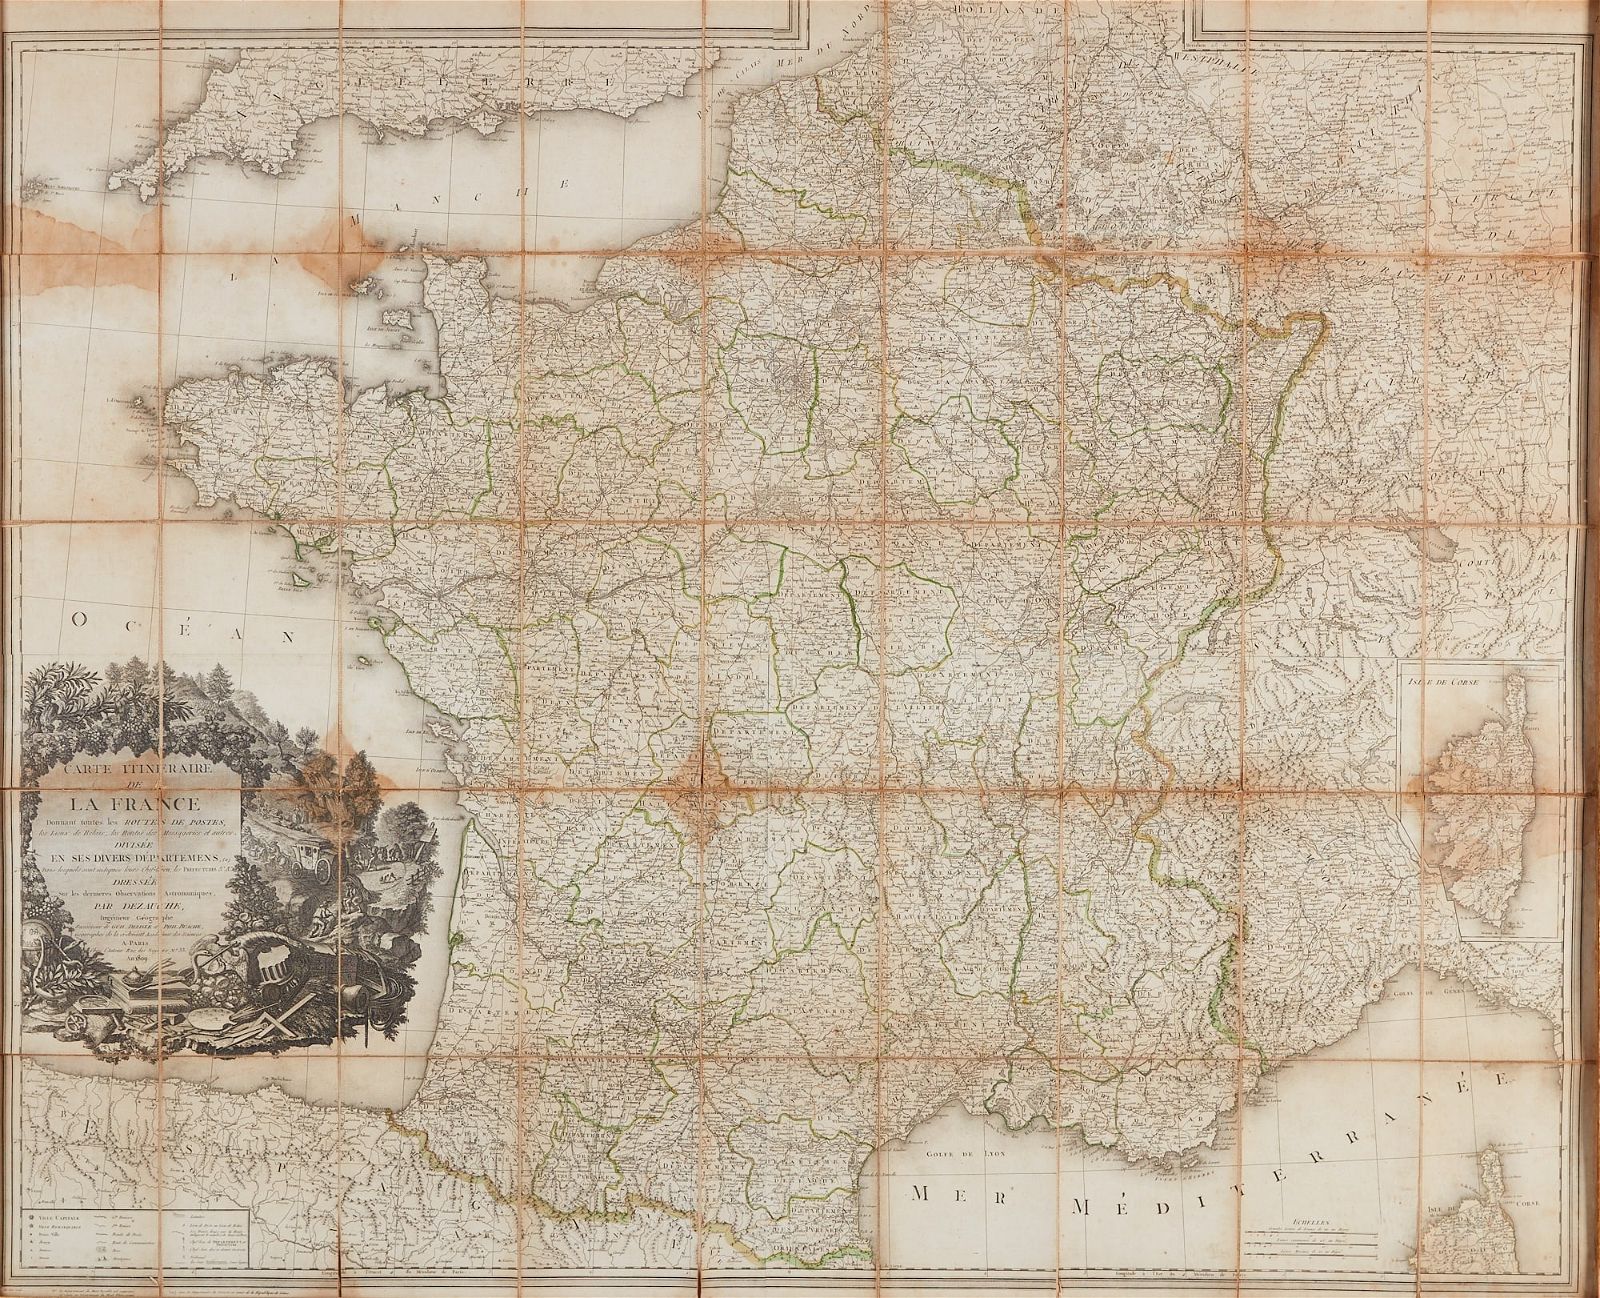 AN 1809 MAP OF THE POSTAL ROUTES